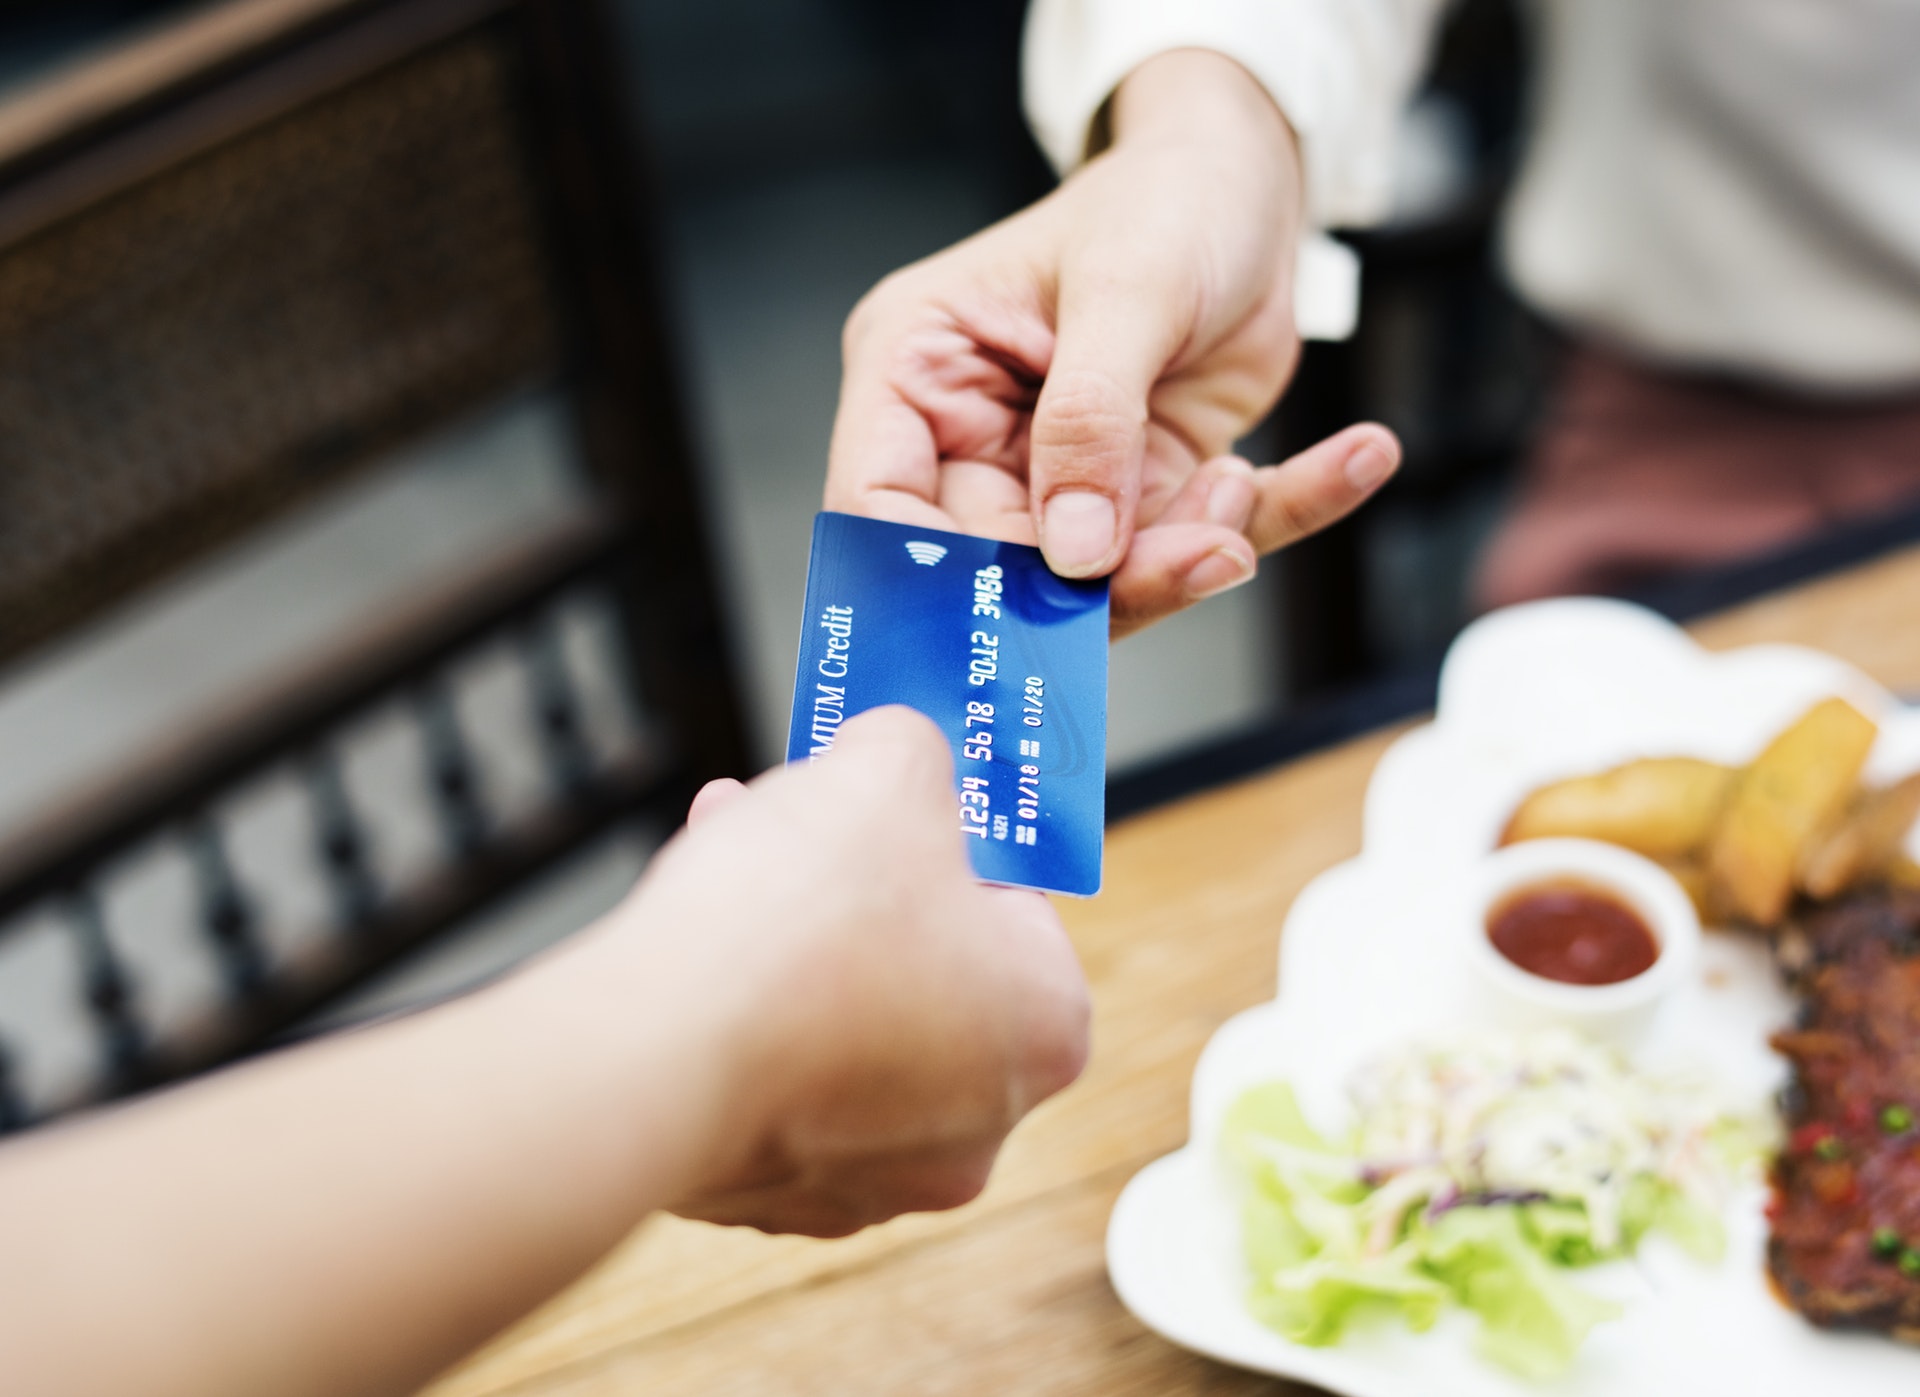 Get The Simplest Way To Use Your Credit Card  Wisely  Without Any Hassle